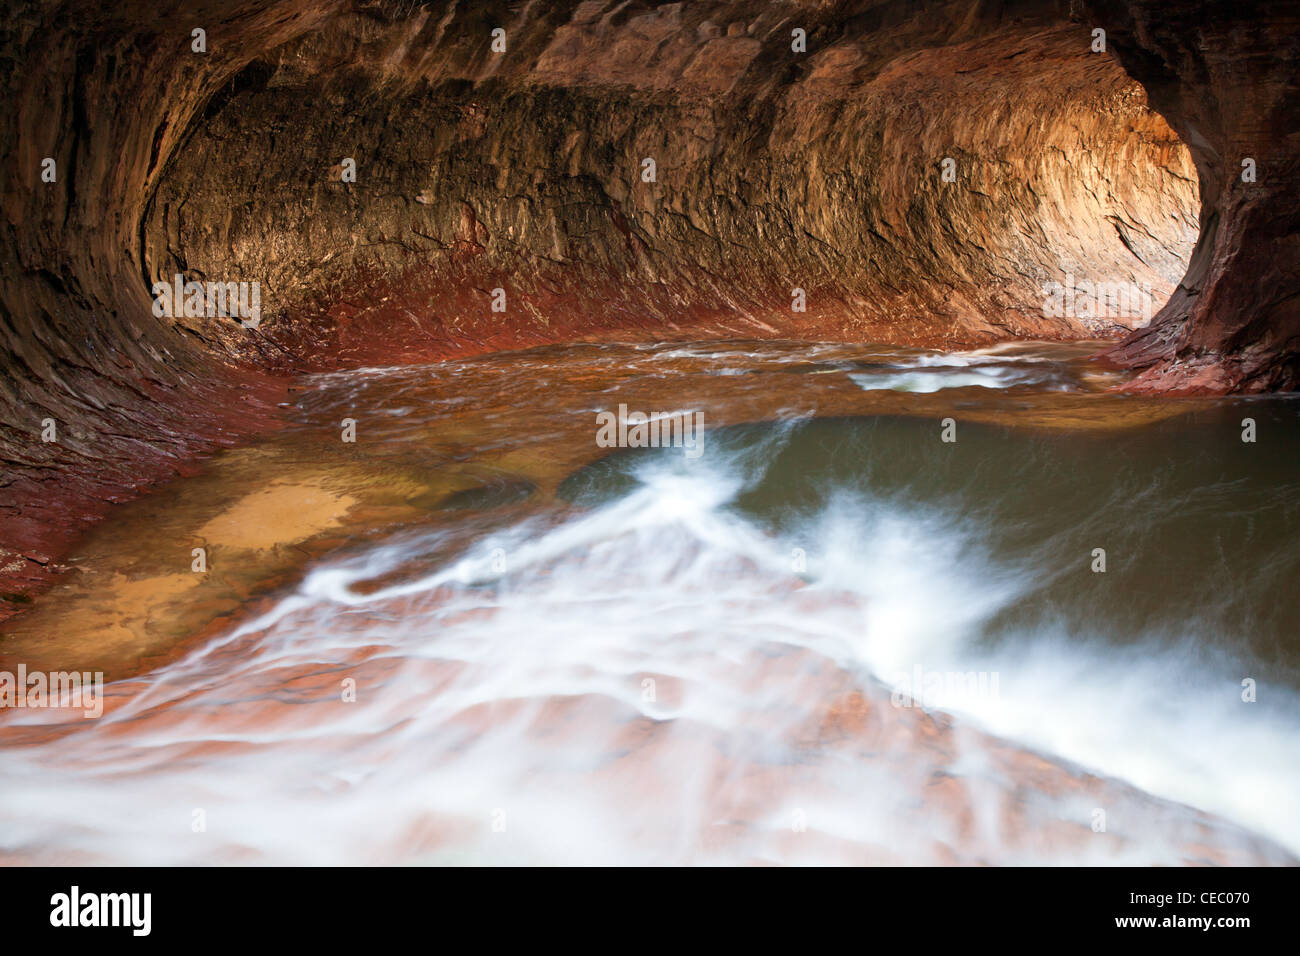 Rushing water in the Subway, Zion National Park Stock Photo